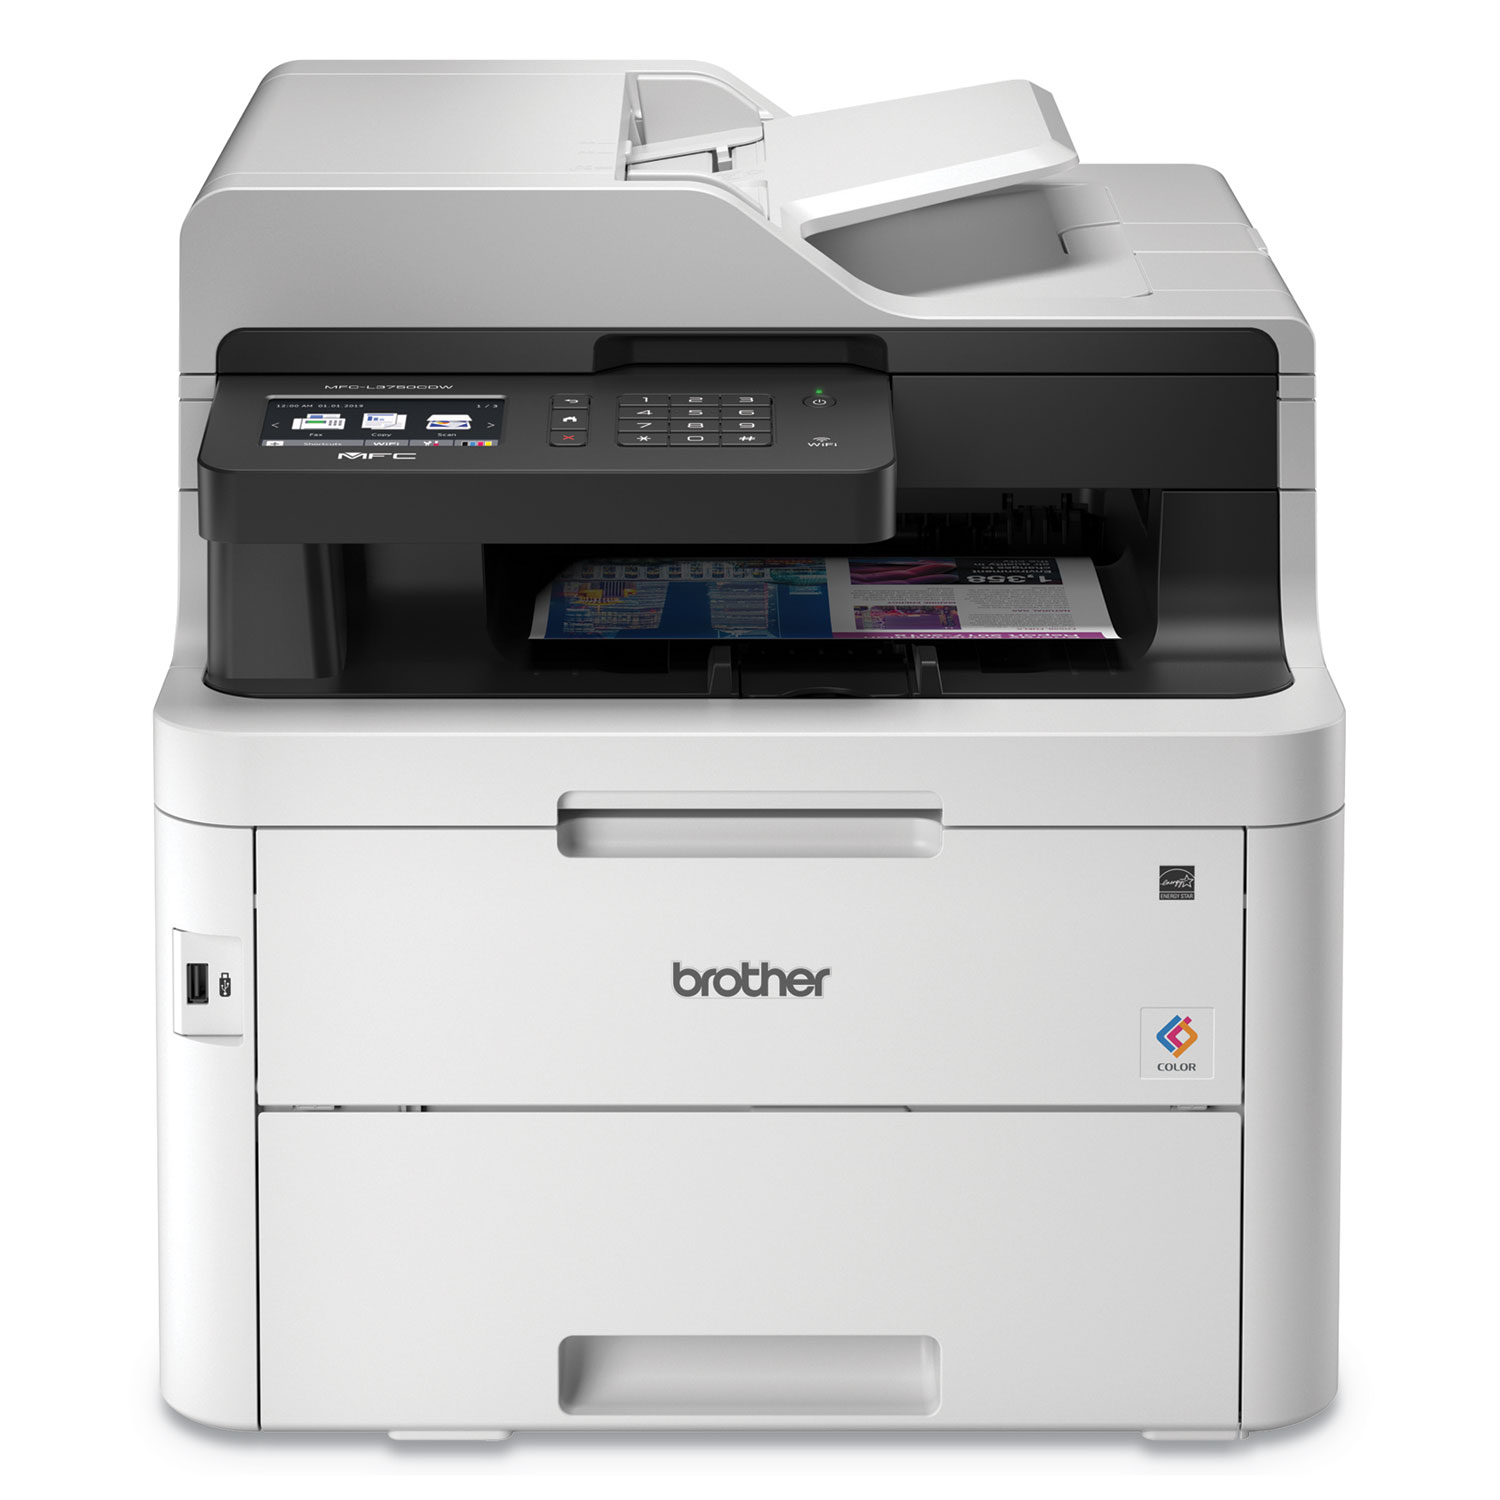  Brother MFCL3750CDW MFCL3750CDW Compact Digital Color All-in-One Printer with 3.7 Color Touchscreen, Wireless and Duplex Printing (BRTMFCL3750CDW) 